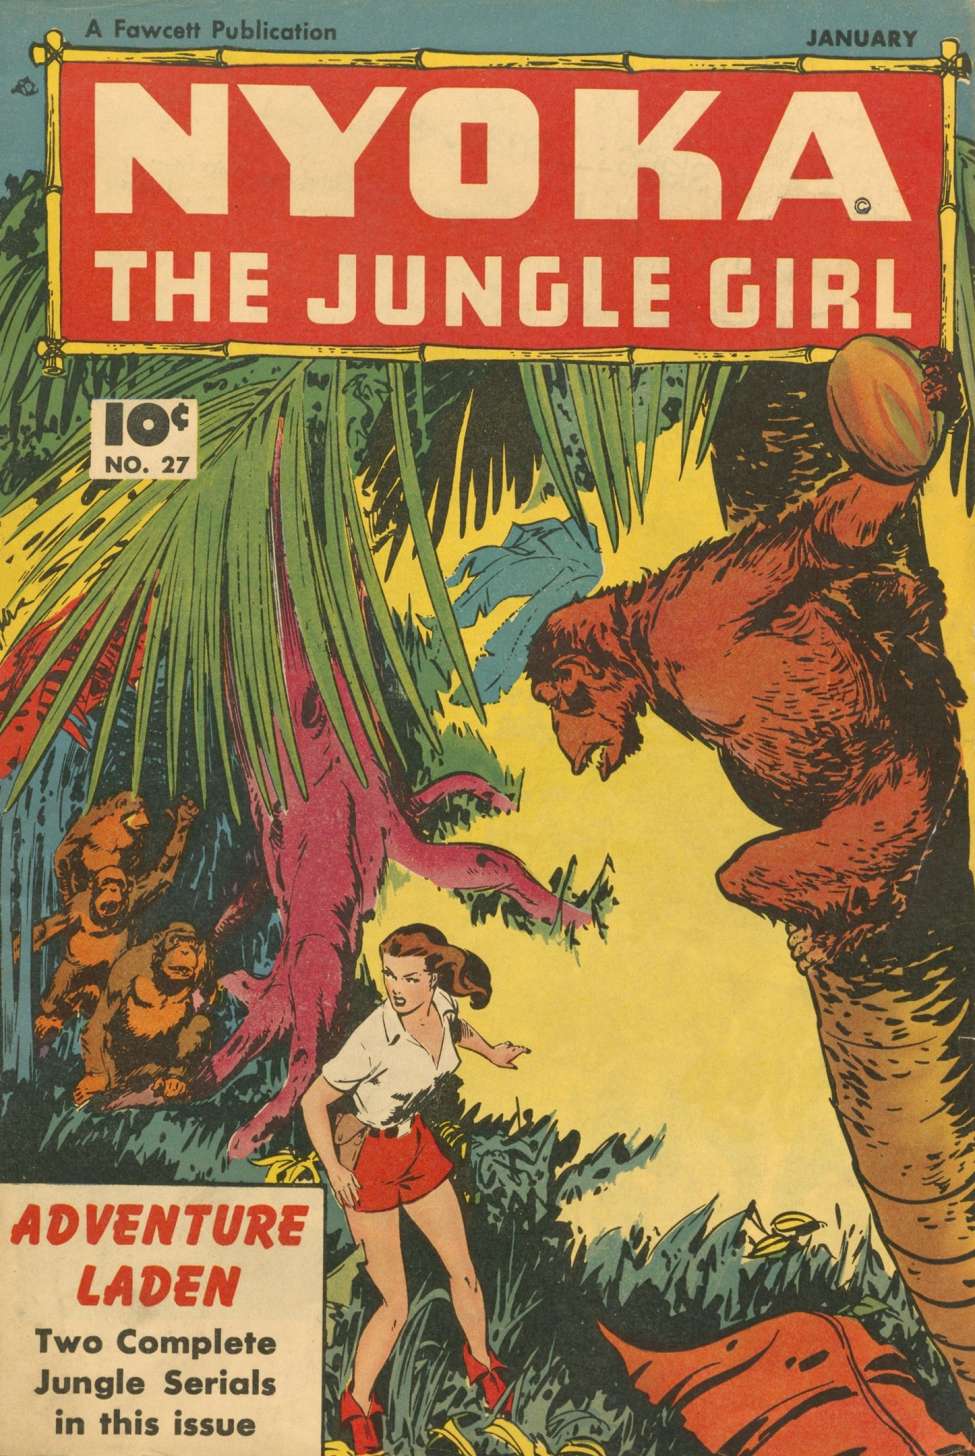 Book Cover For Nyoka the Jungle Girl 27 - Version 2